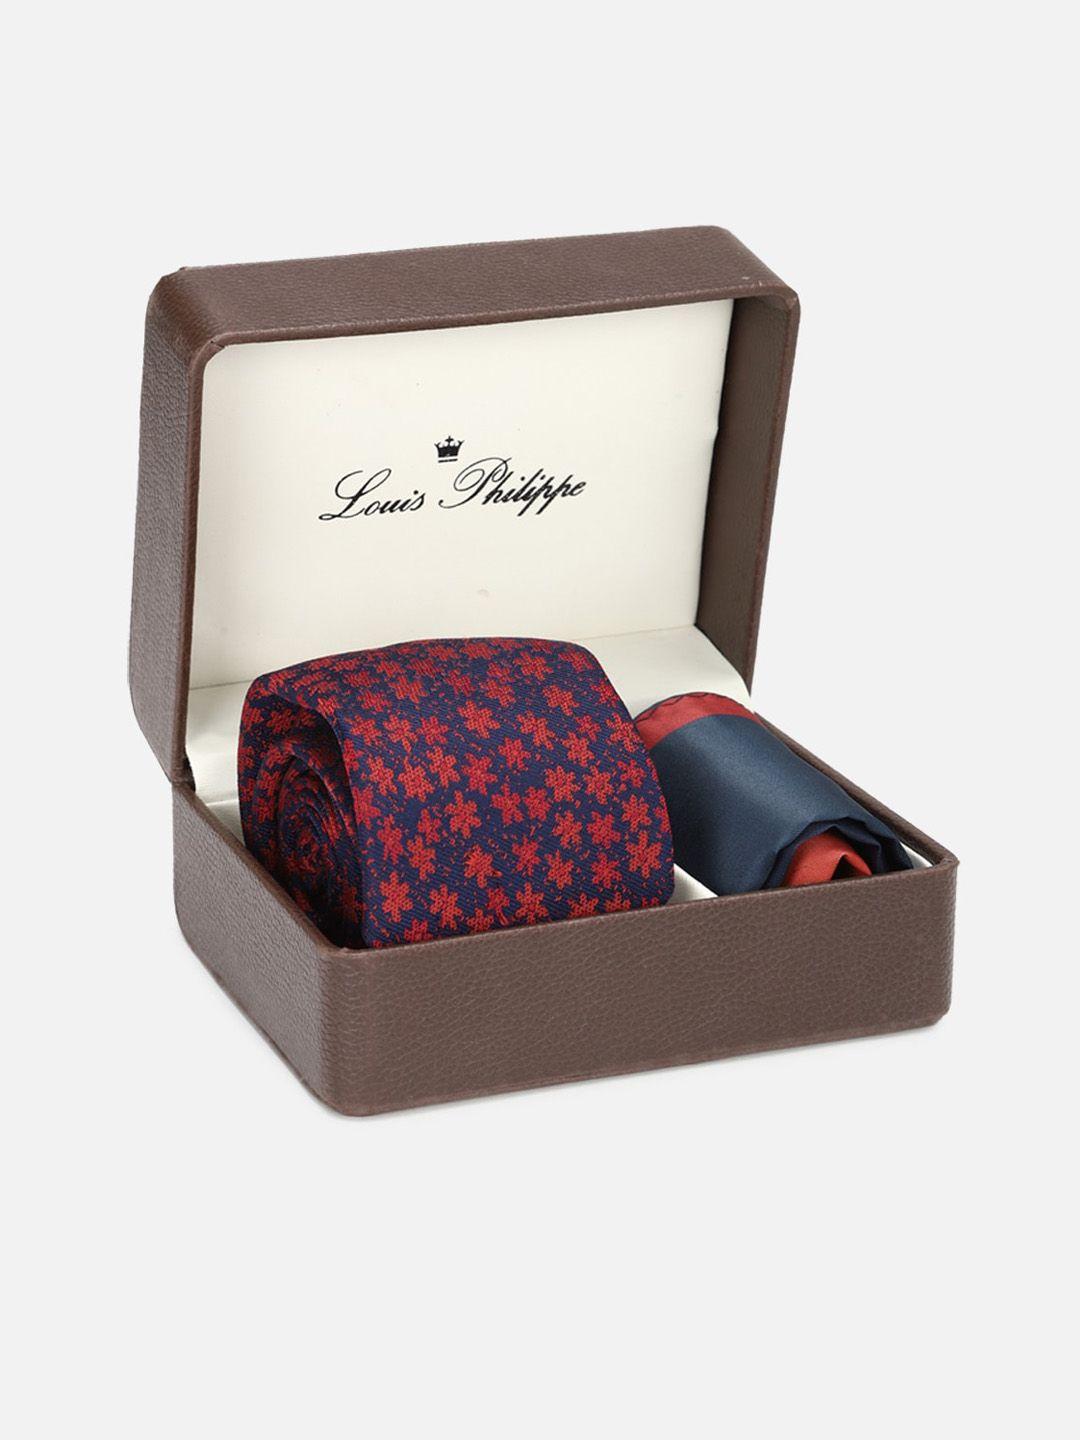 louis philippe men navy blue printed accessory gift set